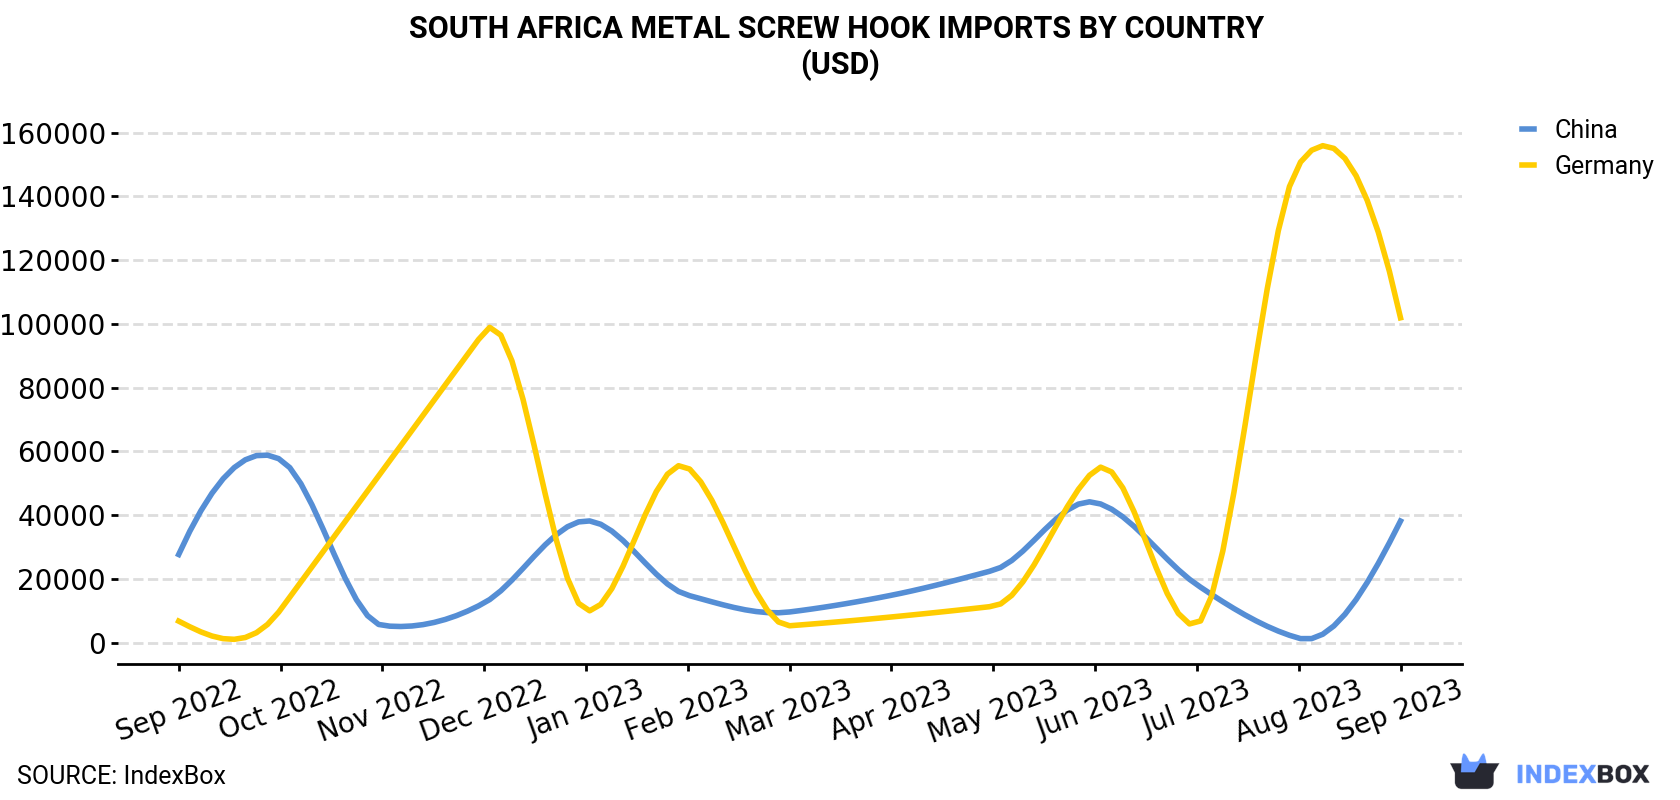 South Africa Metal Screw Hook Imports By Country (USD)